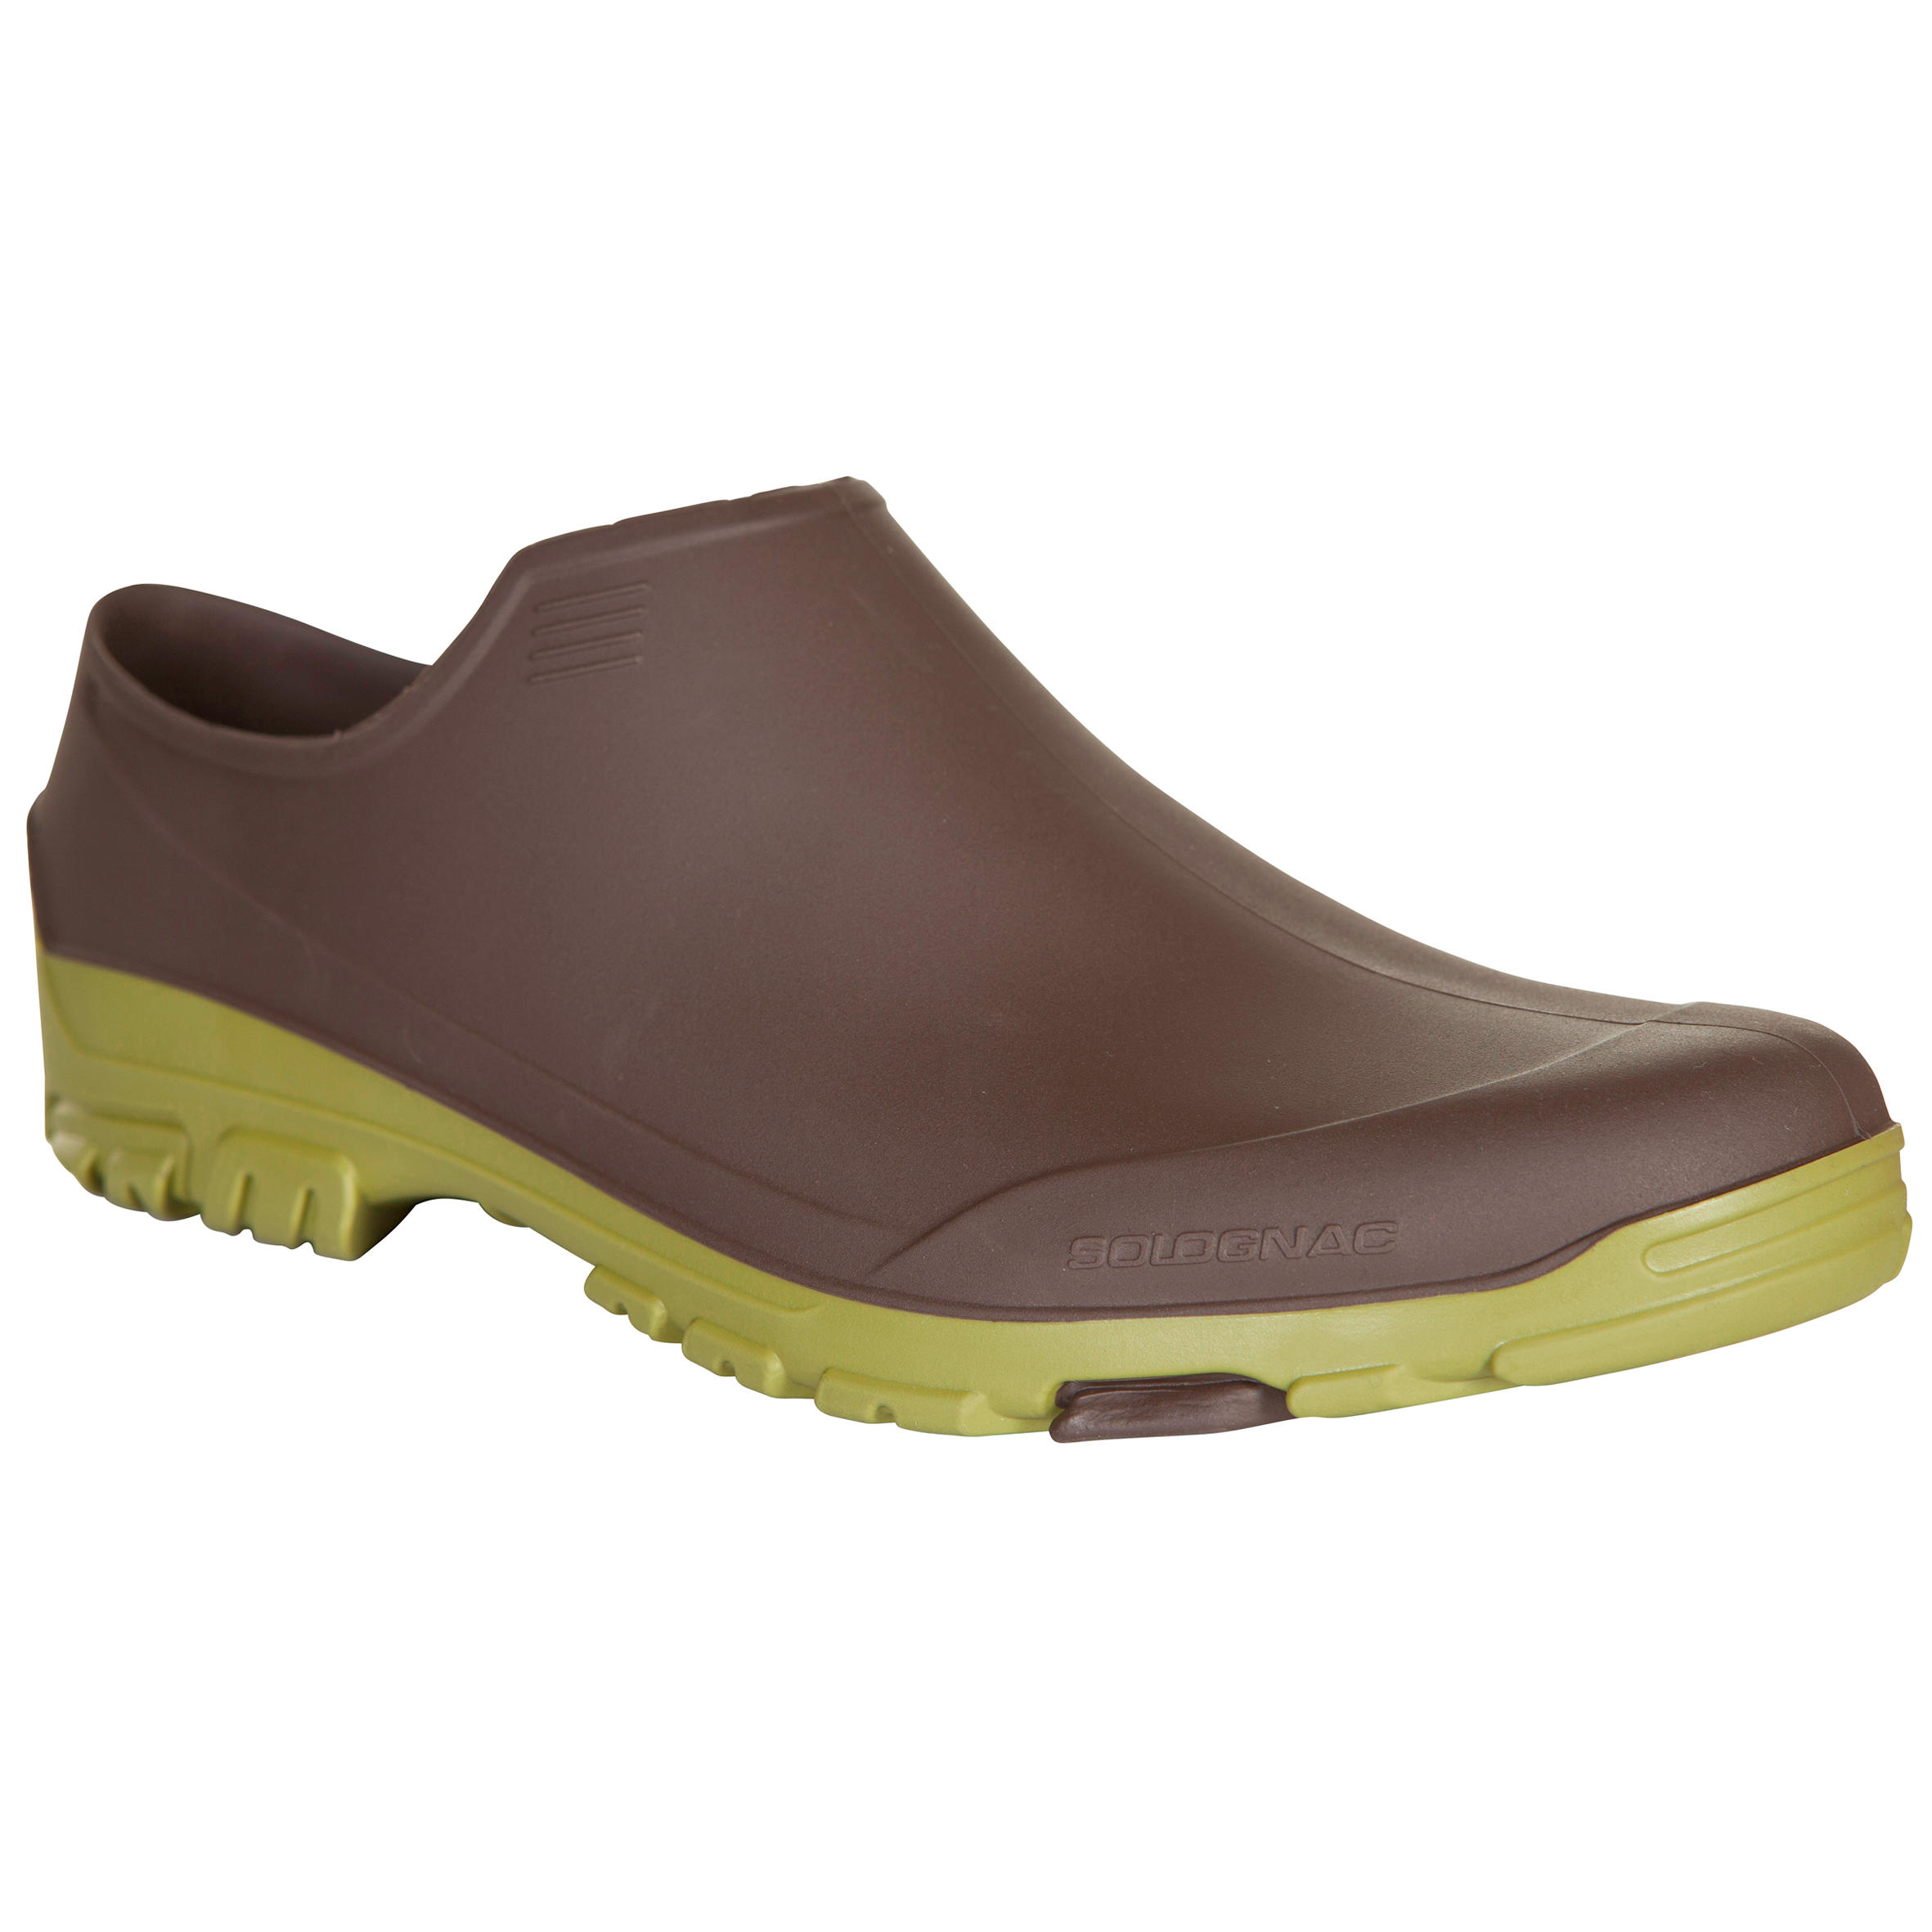 Buy Gumboots for all Ages Online 